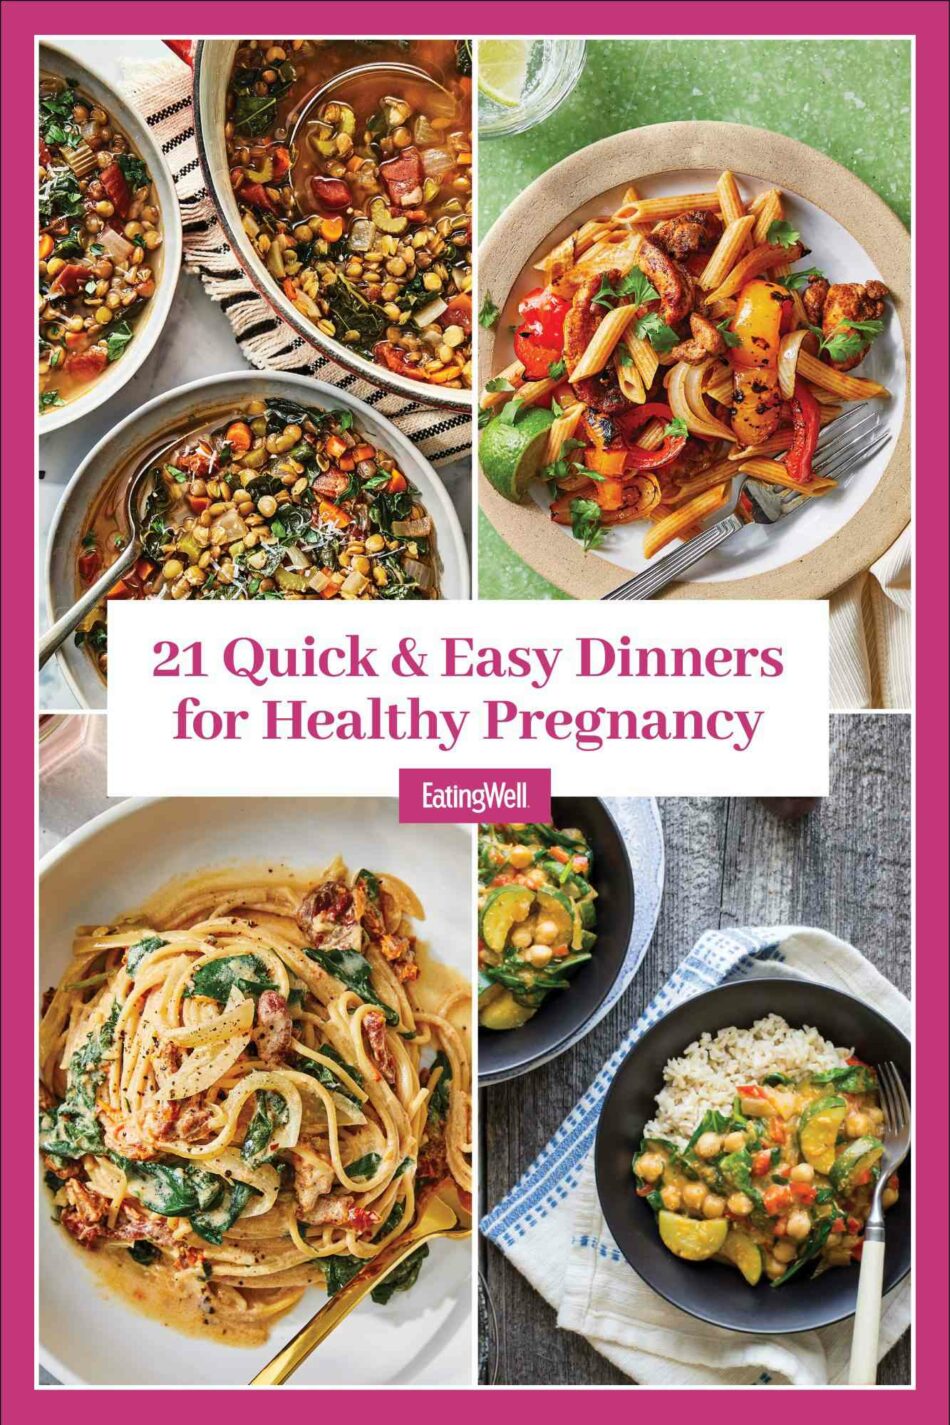 21 Quick & Easy Dinners for Healthy Pregnancy